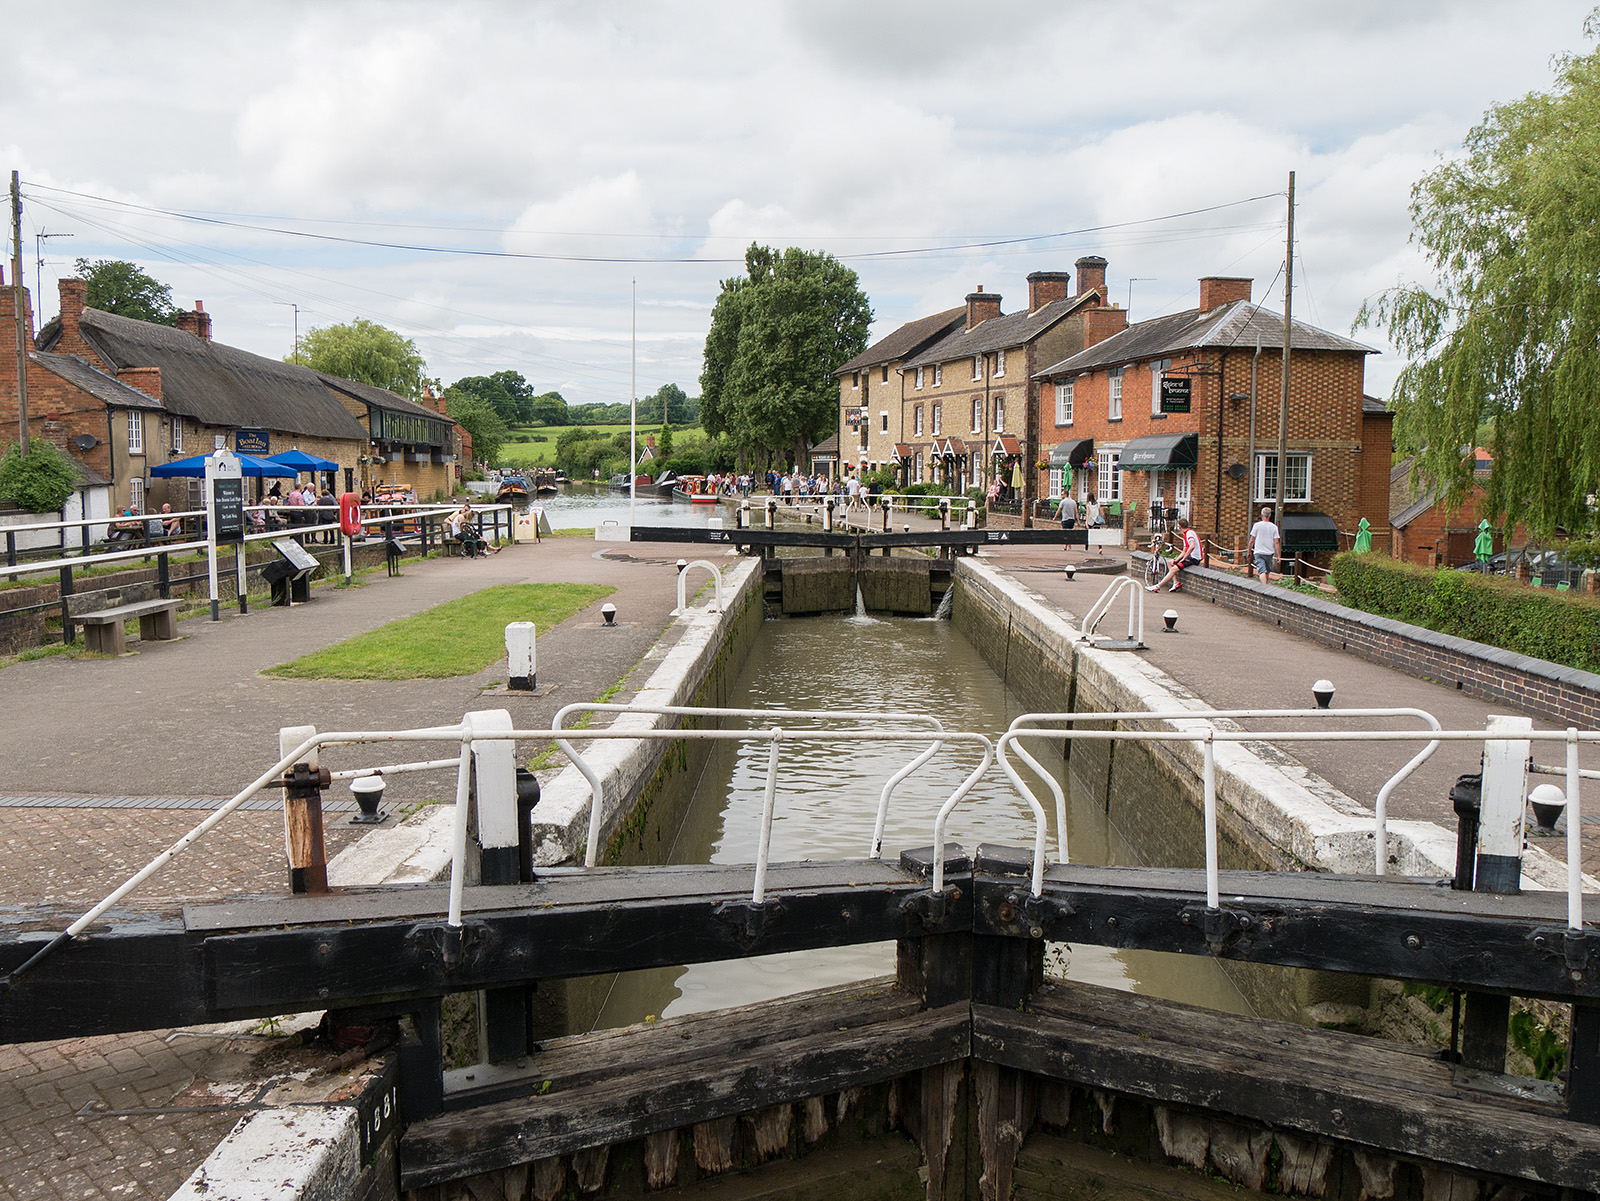 Top lock and canalside museum at Stoke Bruerne